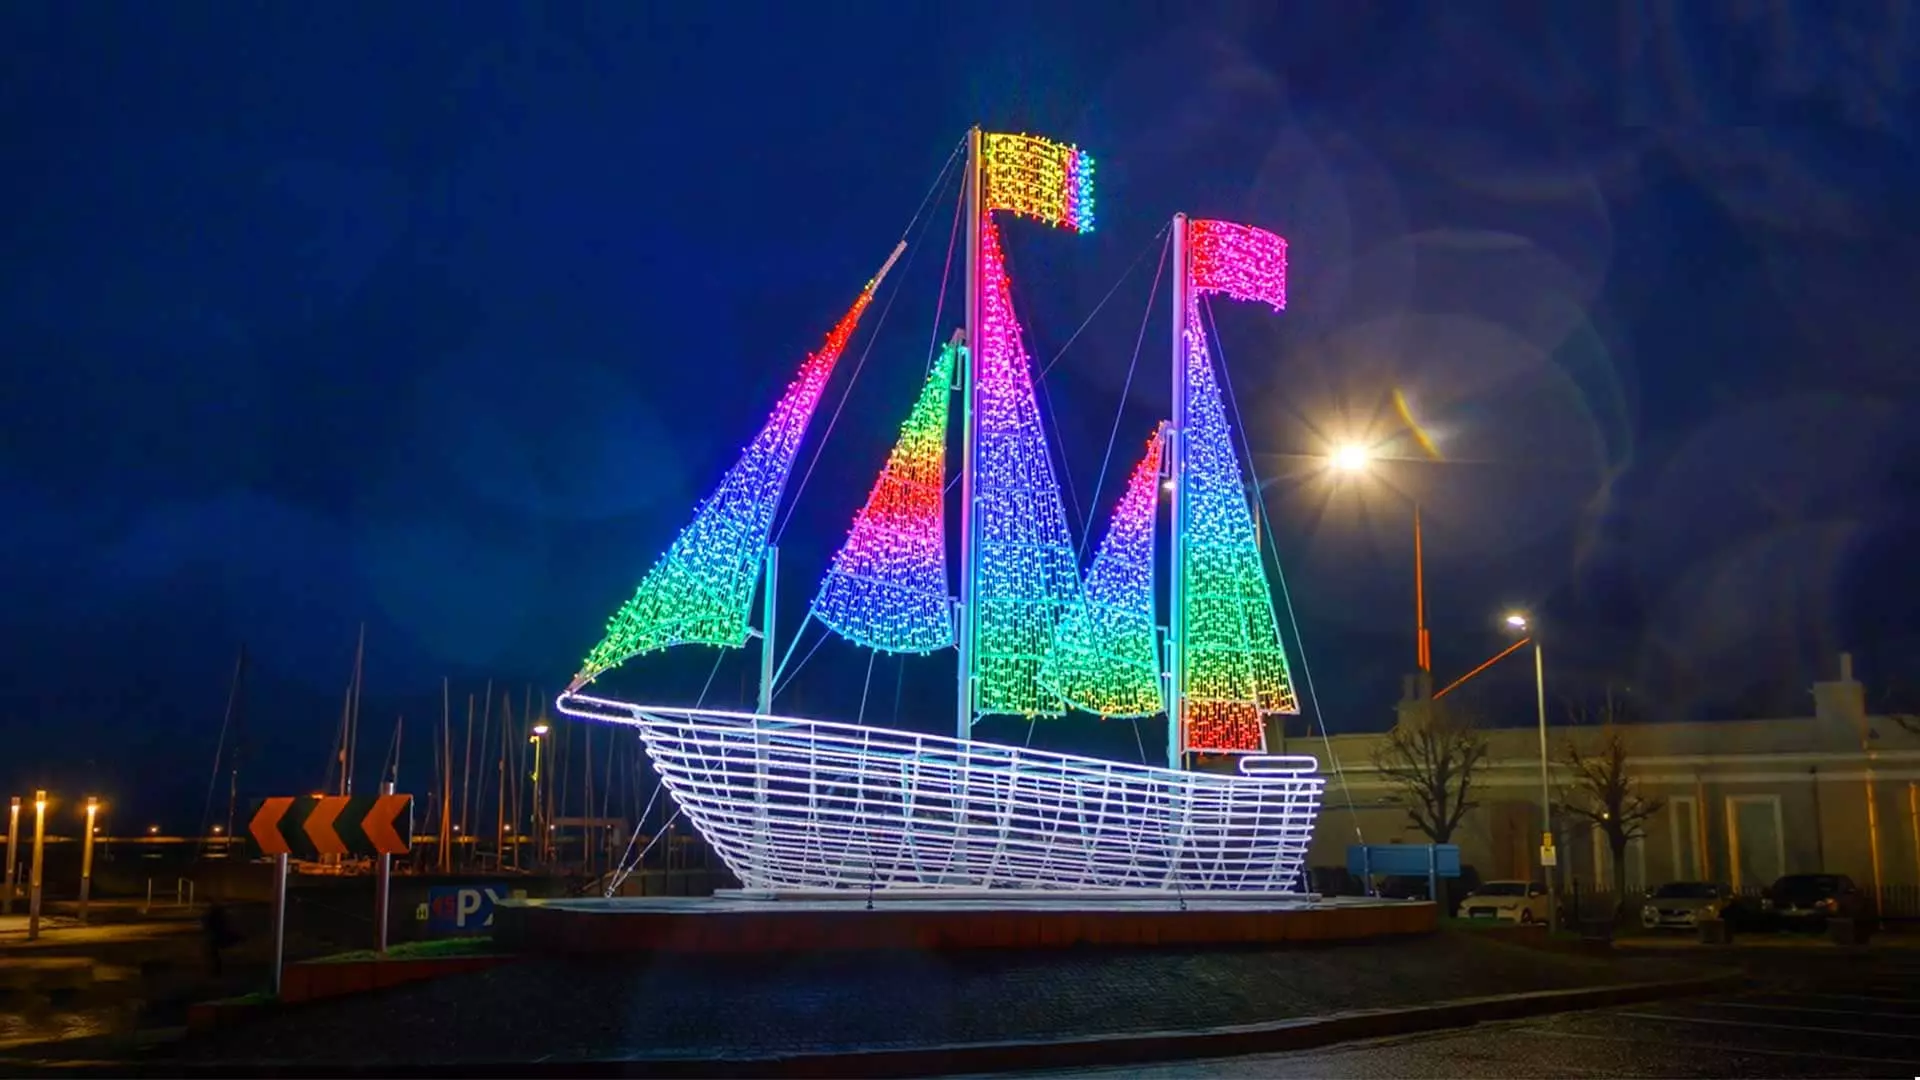 Dun Laoghaire Ship Harbour Commercial Christmas Lighting